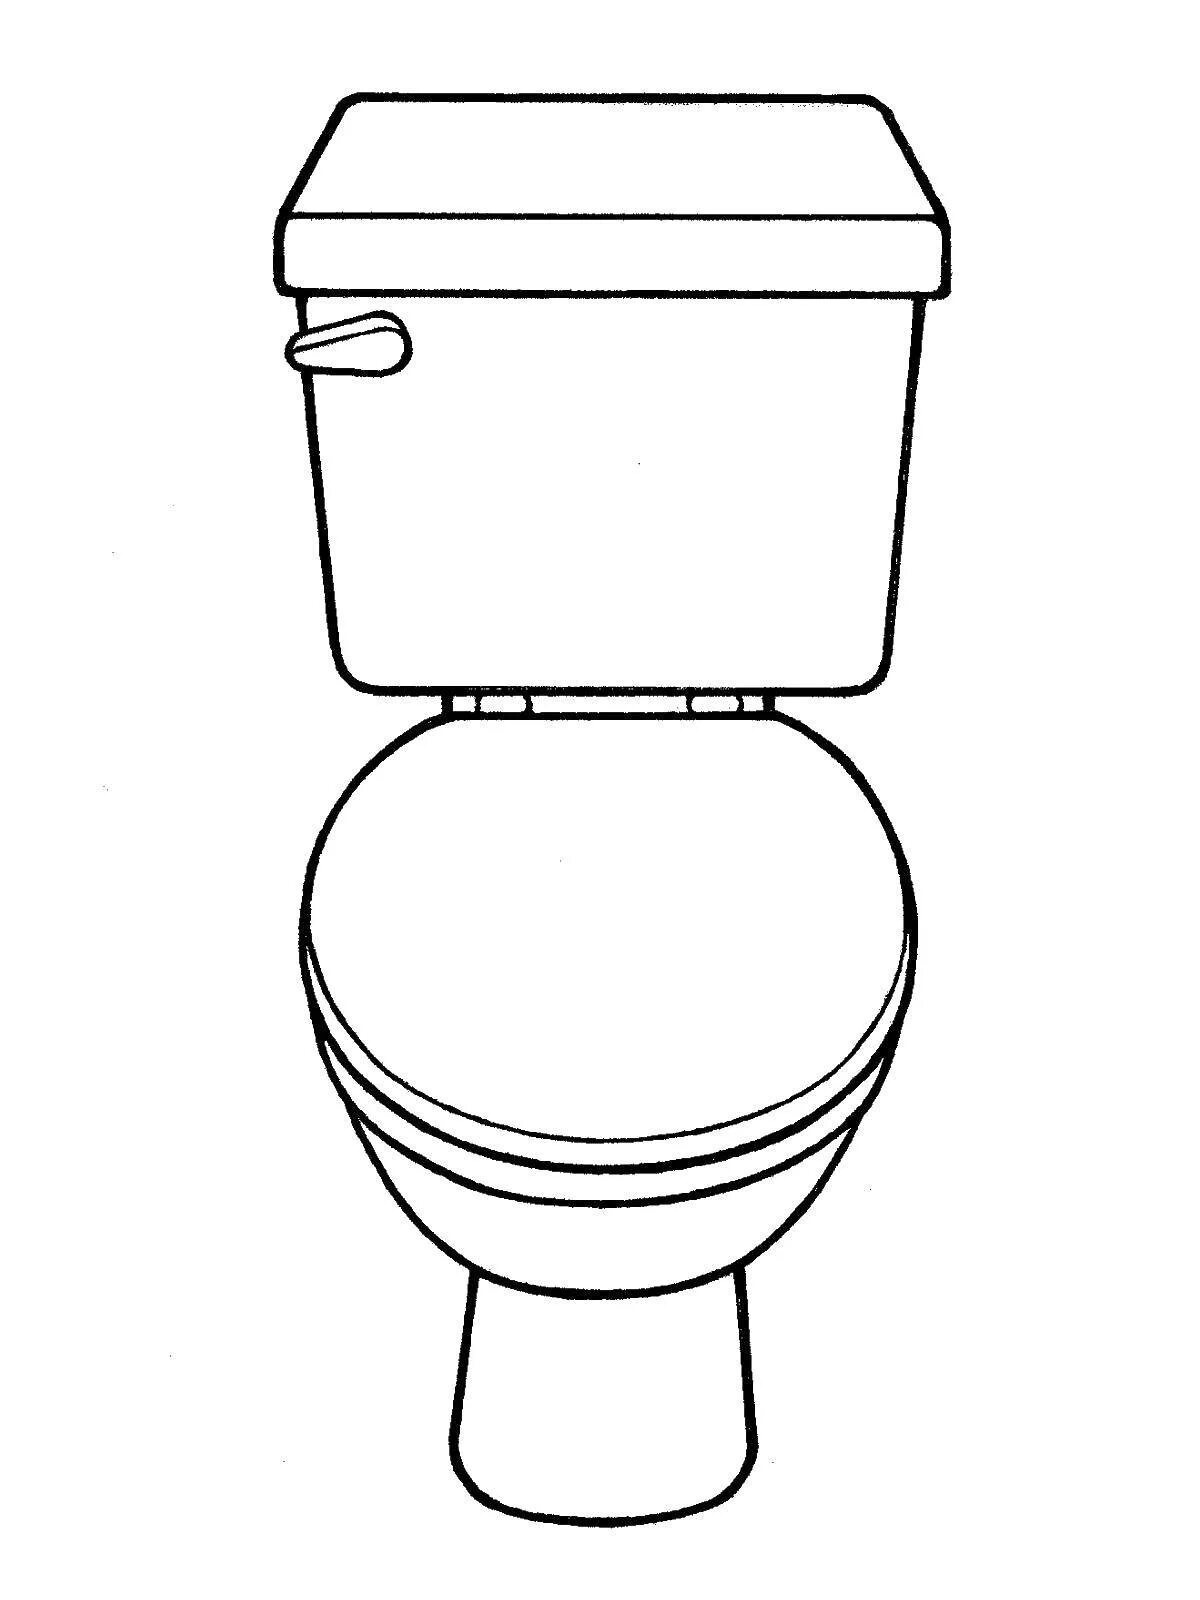 Exquisite toilet coloring book for kids